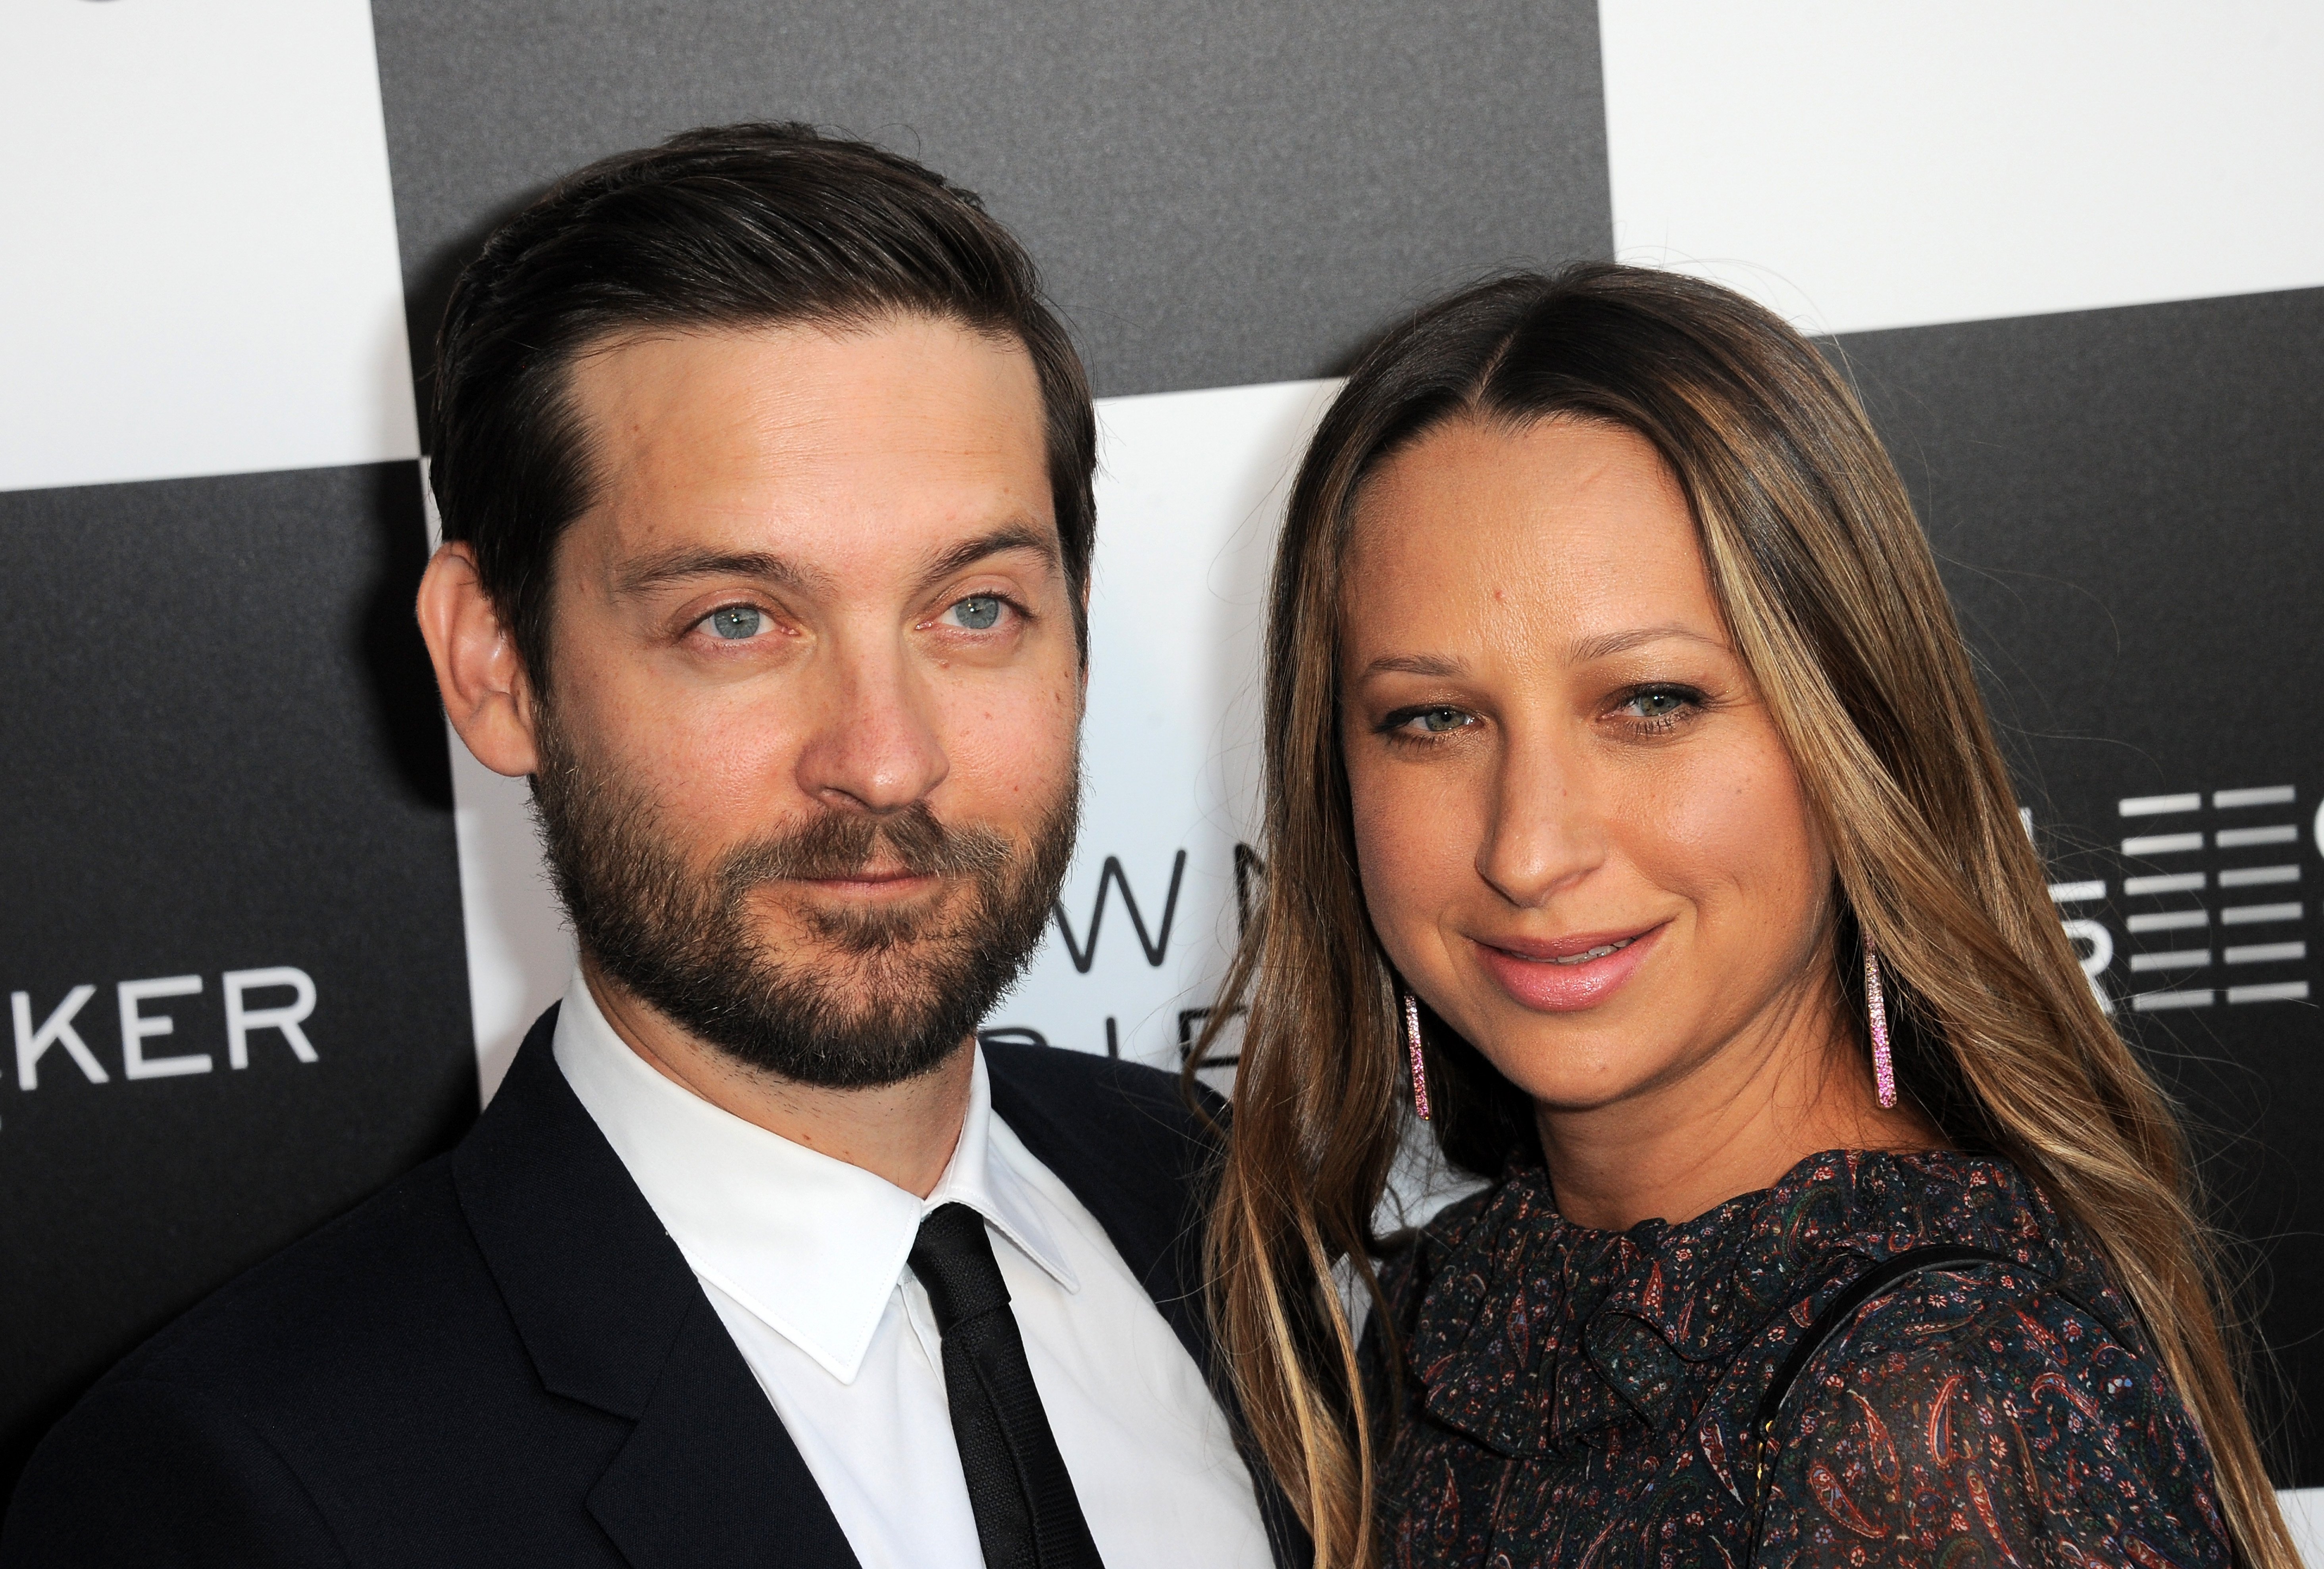 Tobey Maguire and Jennifer Meyer at the premiere of "Pawn Sacrifice" in 2015 in Los Angeles. | Source: Getty Images